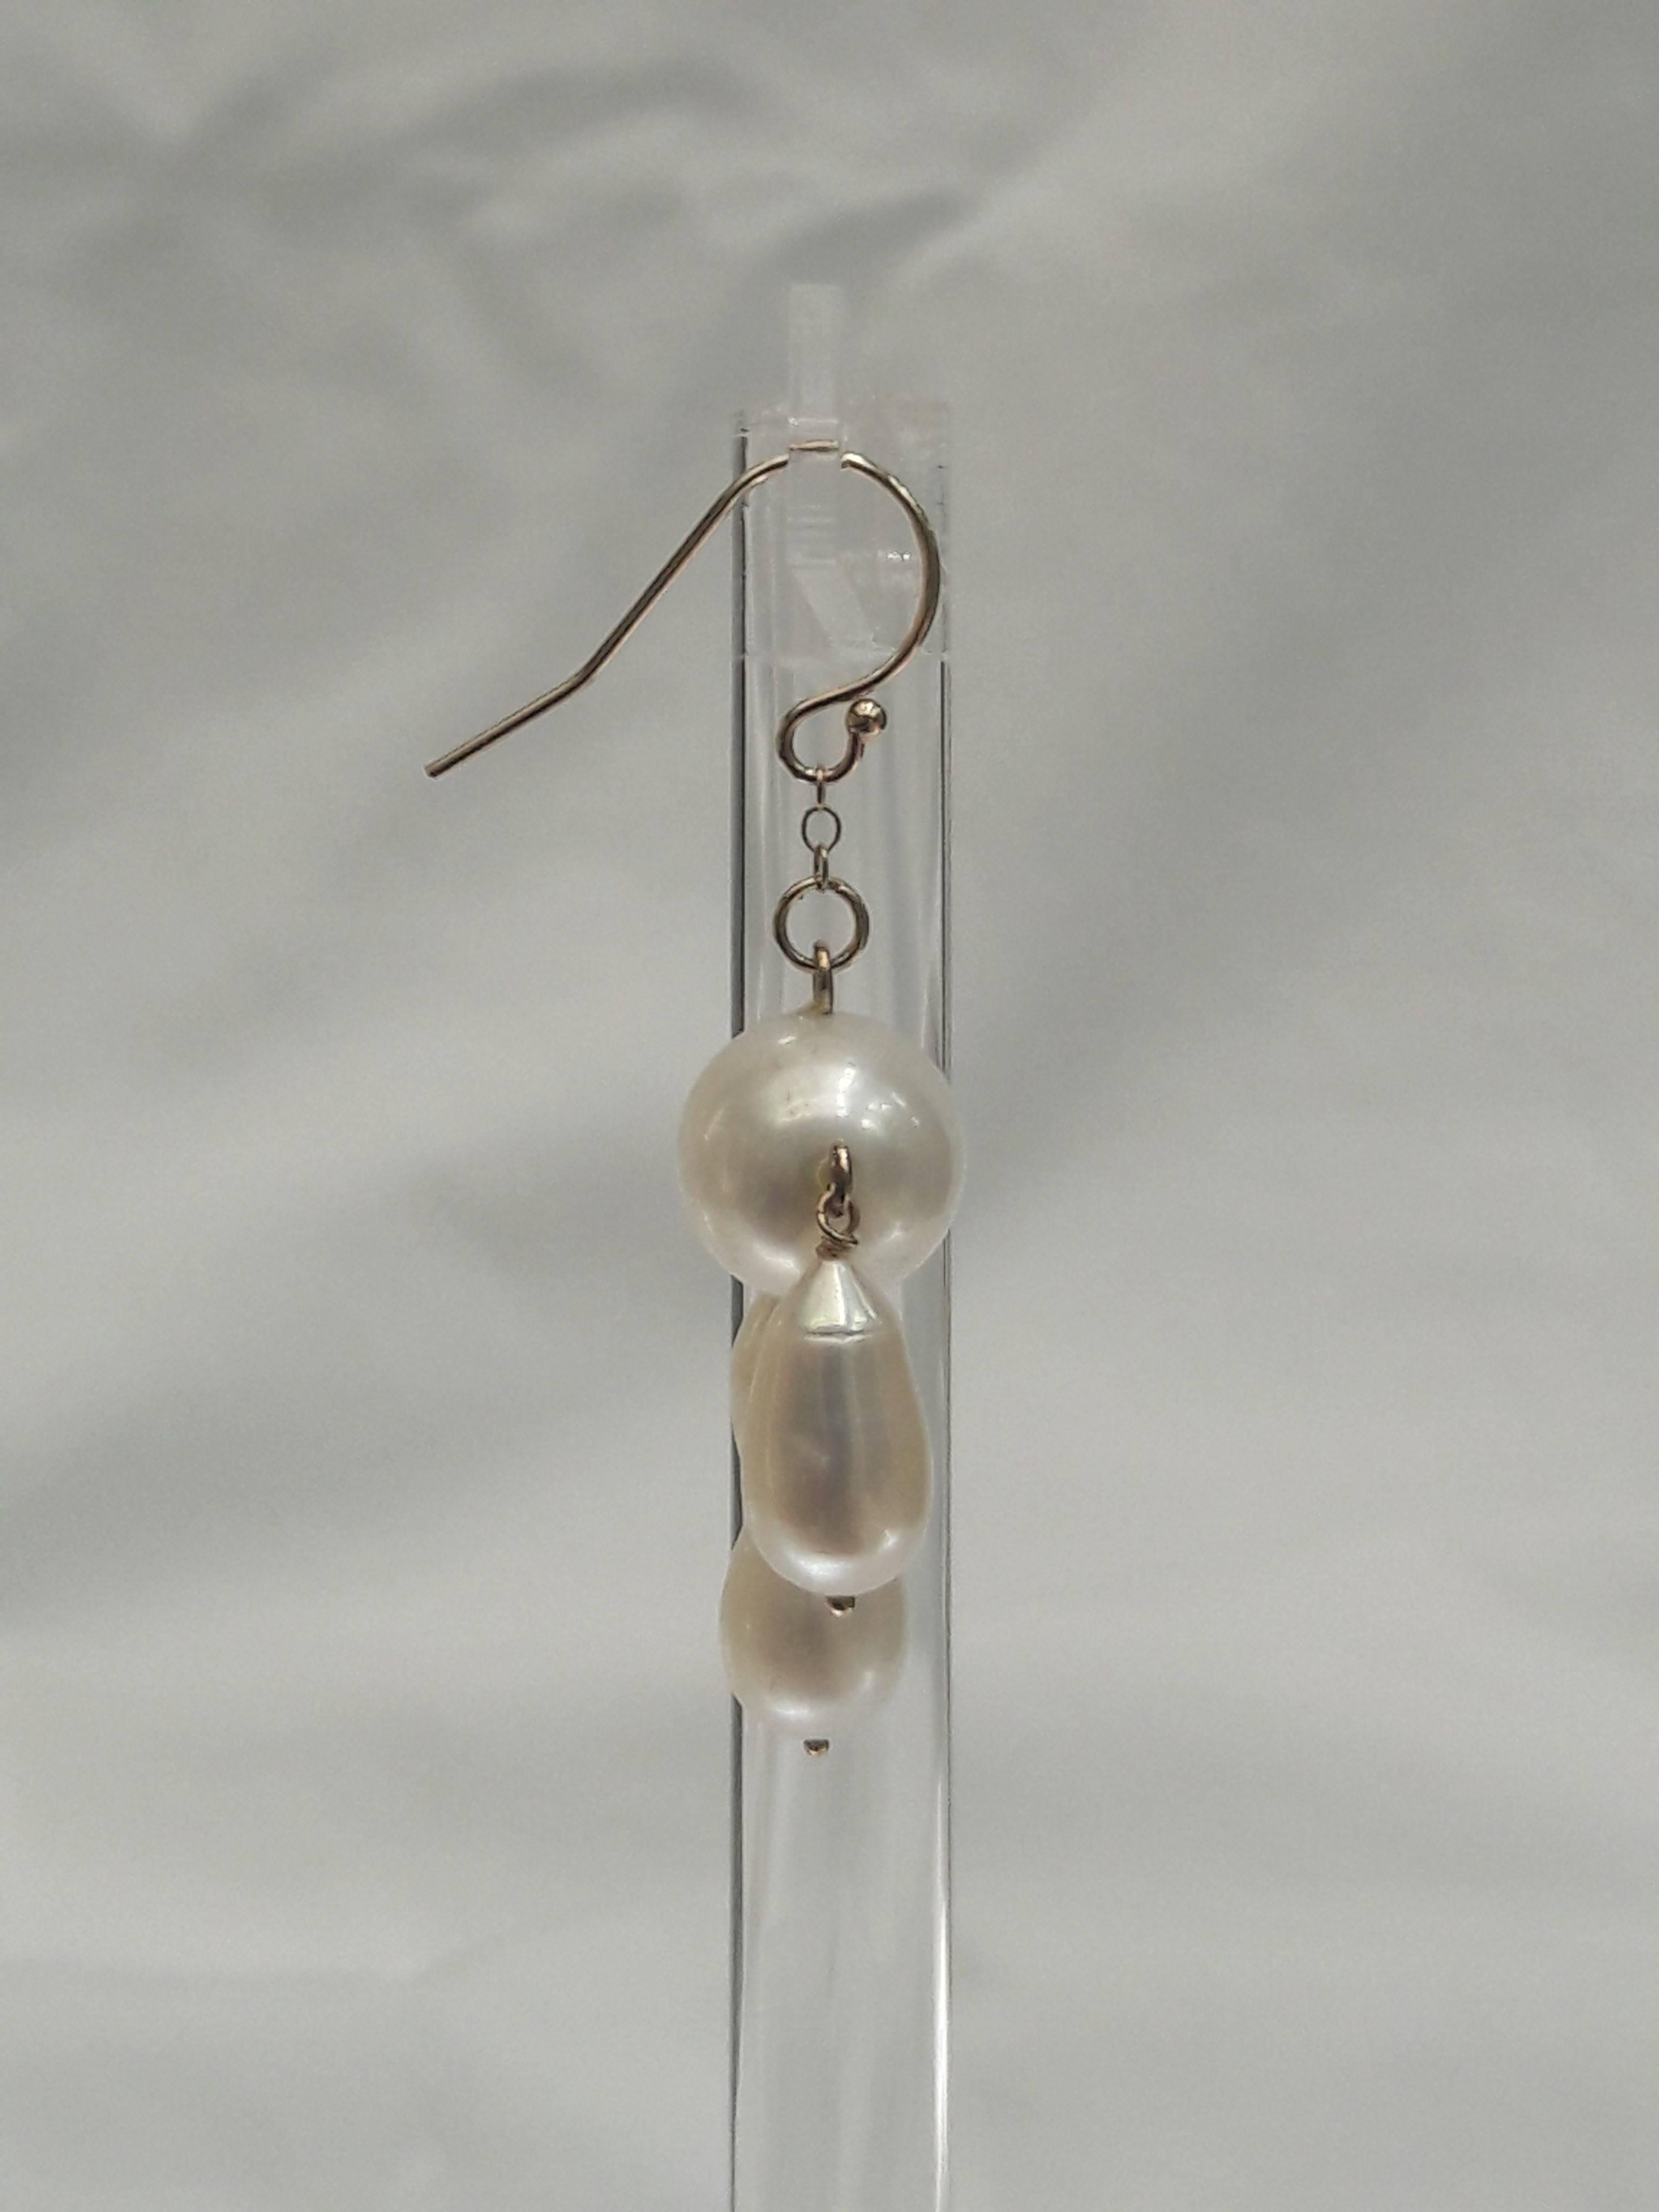 Three teardrop pearls dangle from oval shaped Baroque Pearl.

Fitted with 14 k yellow gold findings and ear wire.

Timeless and elegant. Matches any ensemble. Perfect for bridal and other formal occasions.

From top to bottom measures 1.25 inches